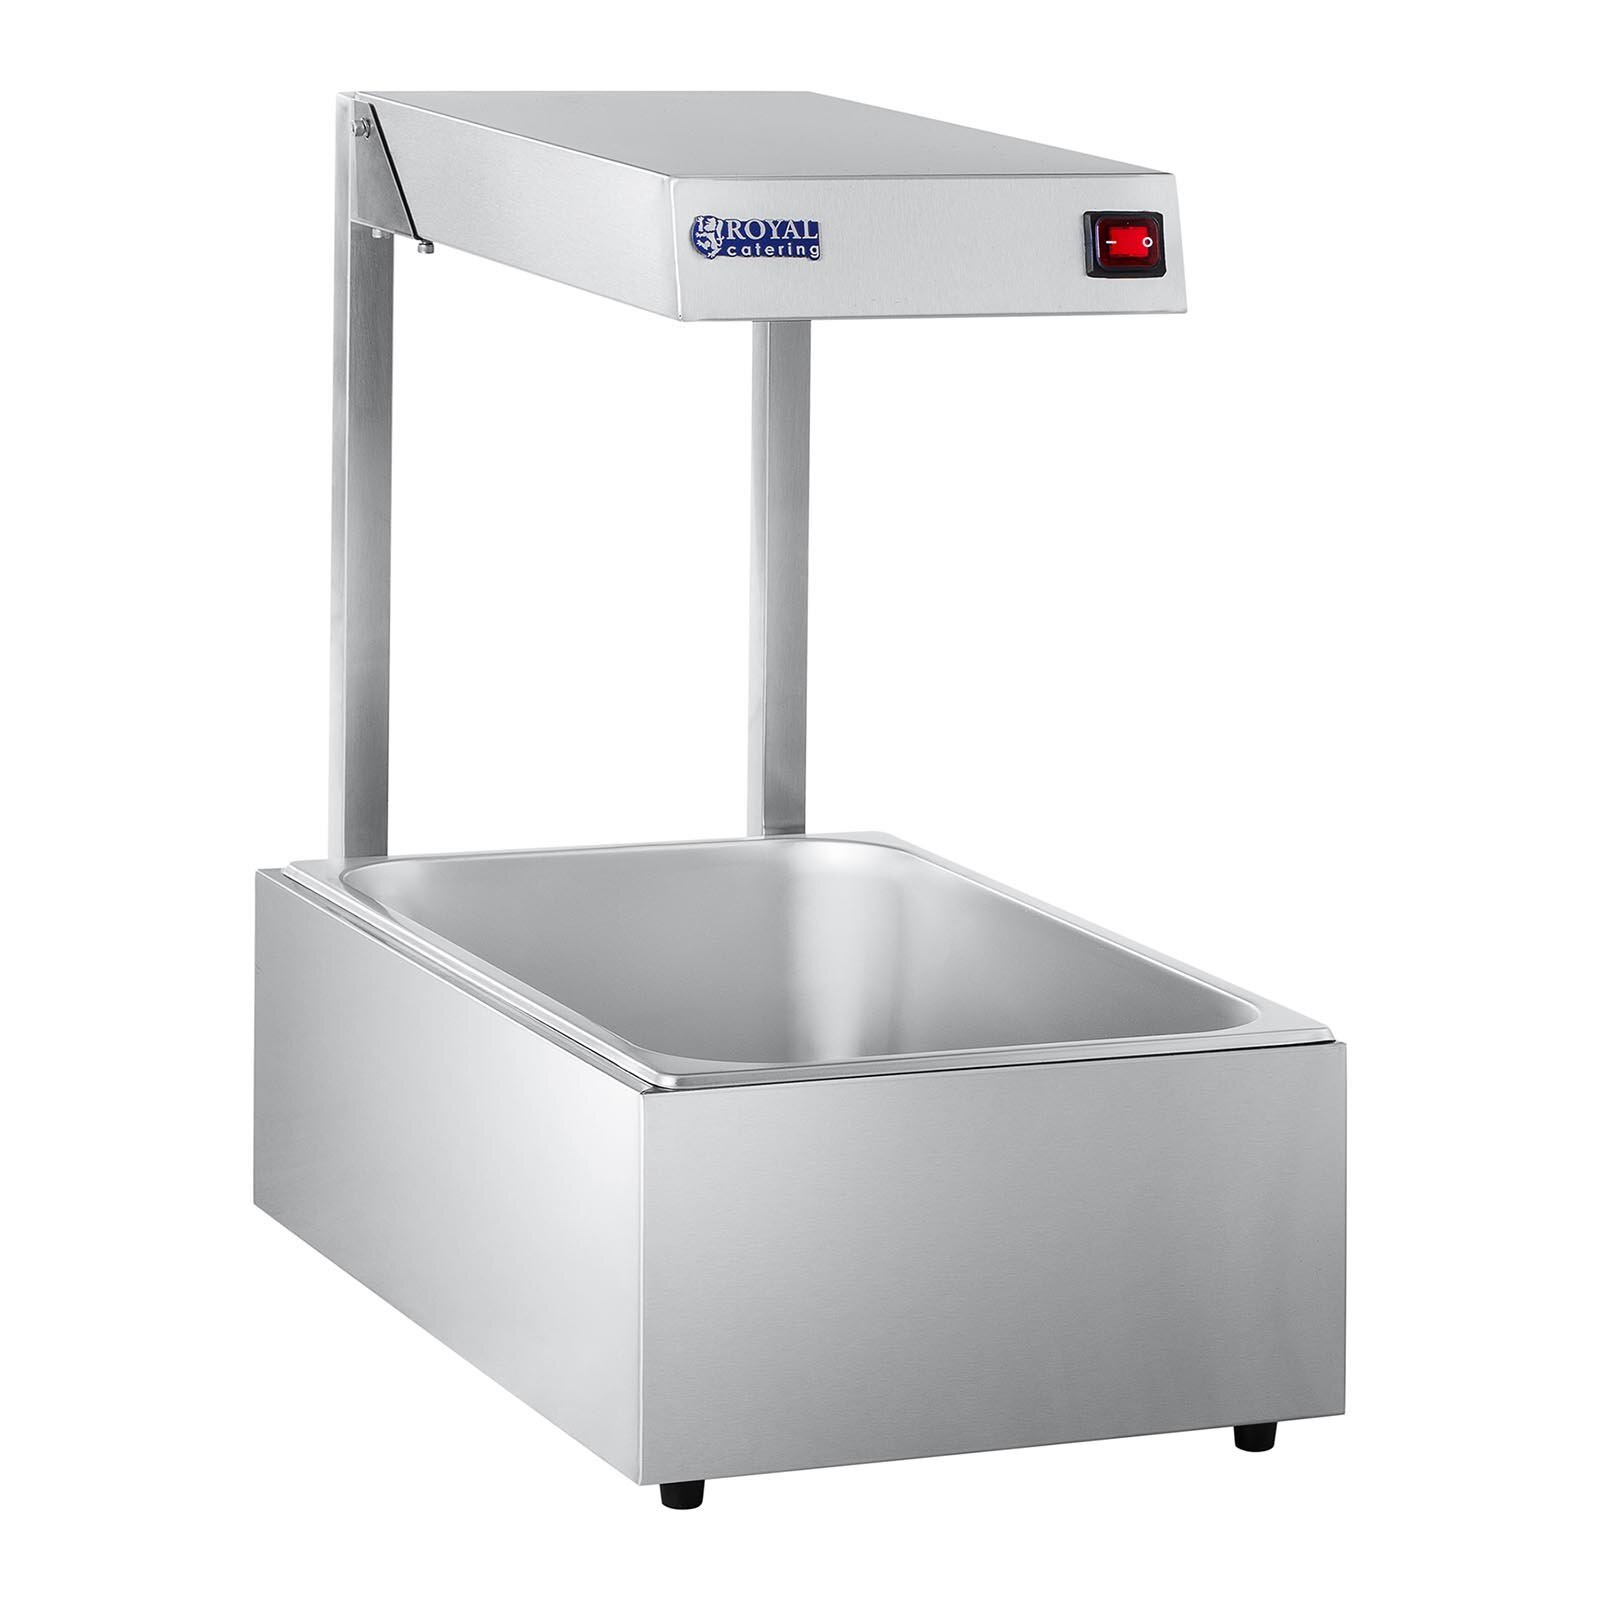 Royal Catering Warmtebrug - 500 W - GN 1/1 container